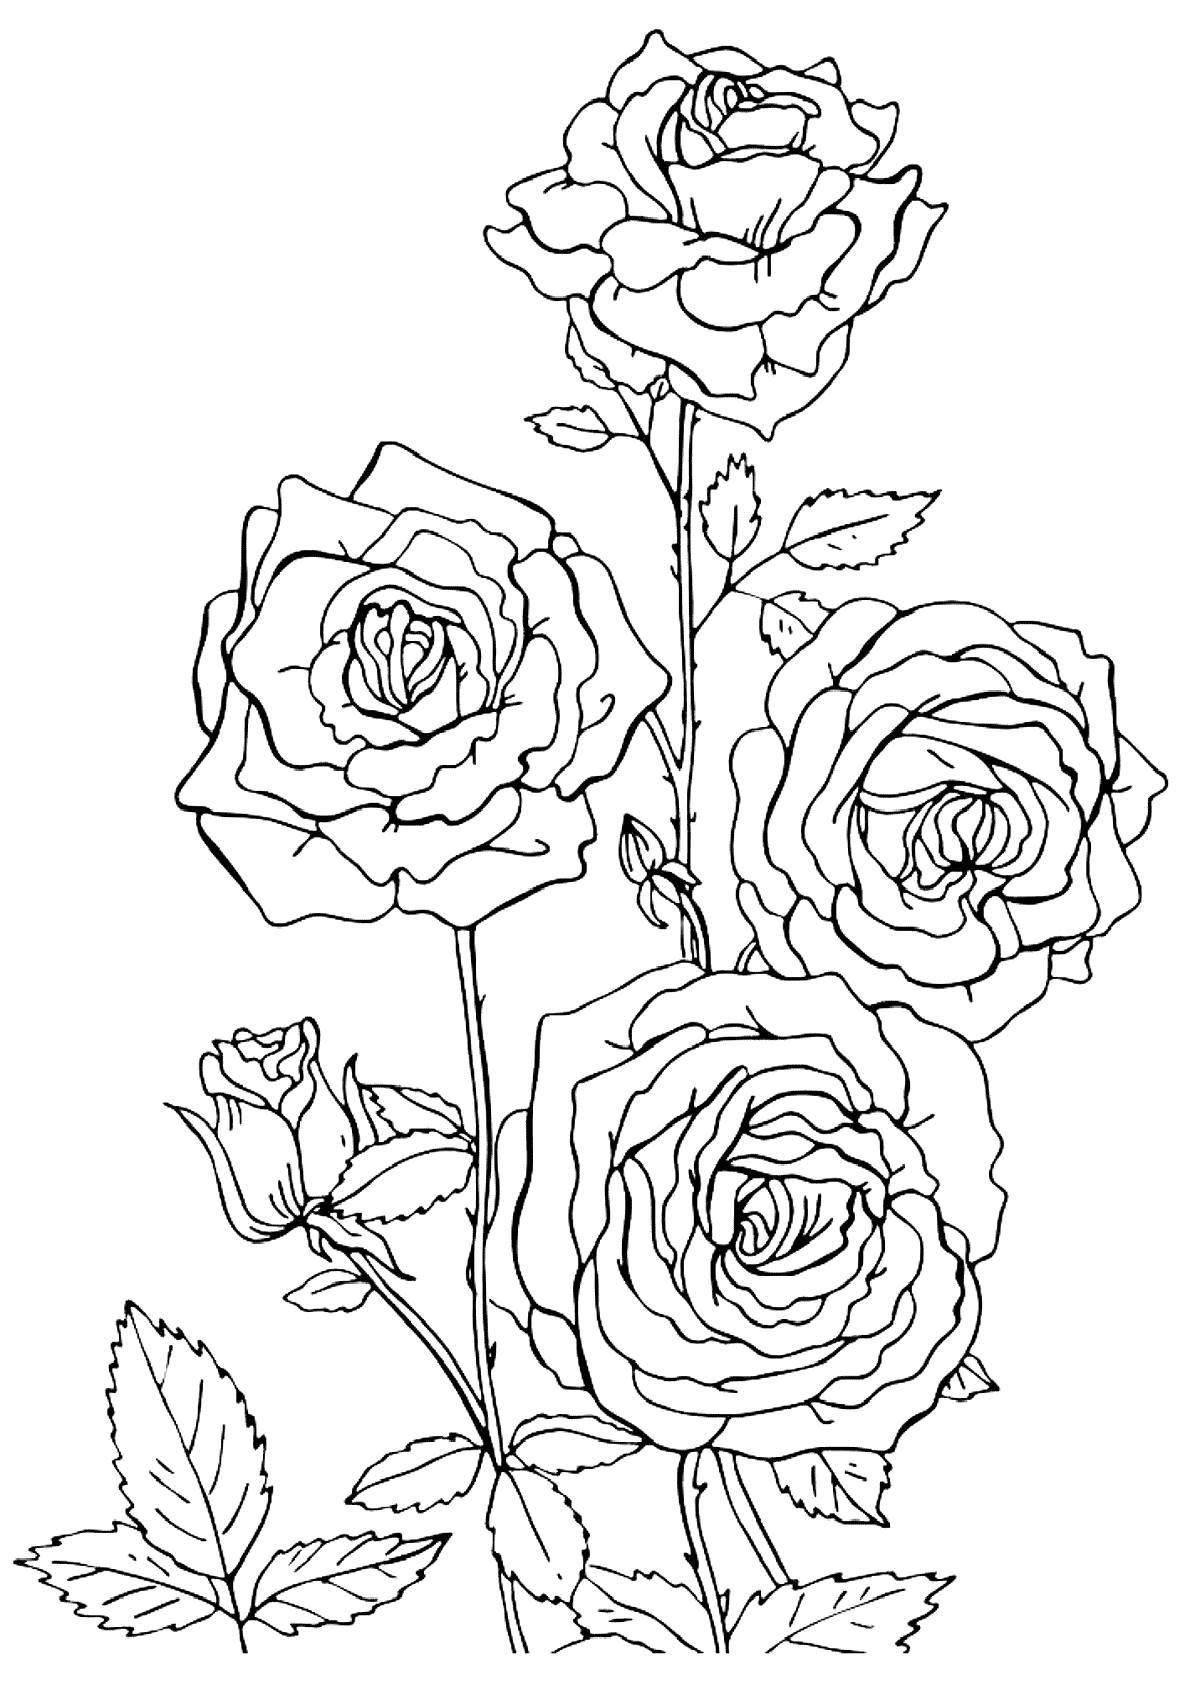 Charming rose coloring book